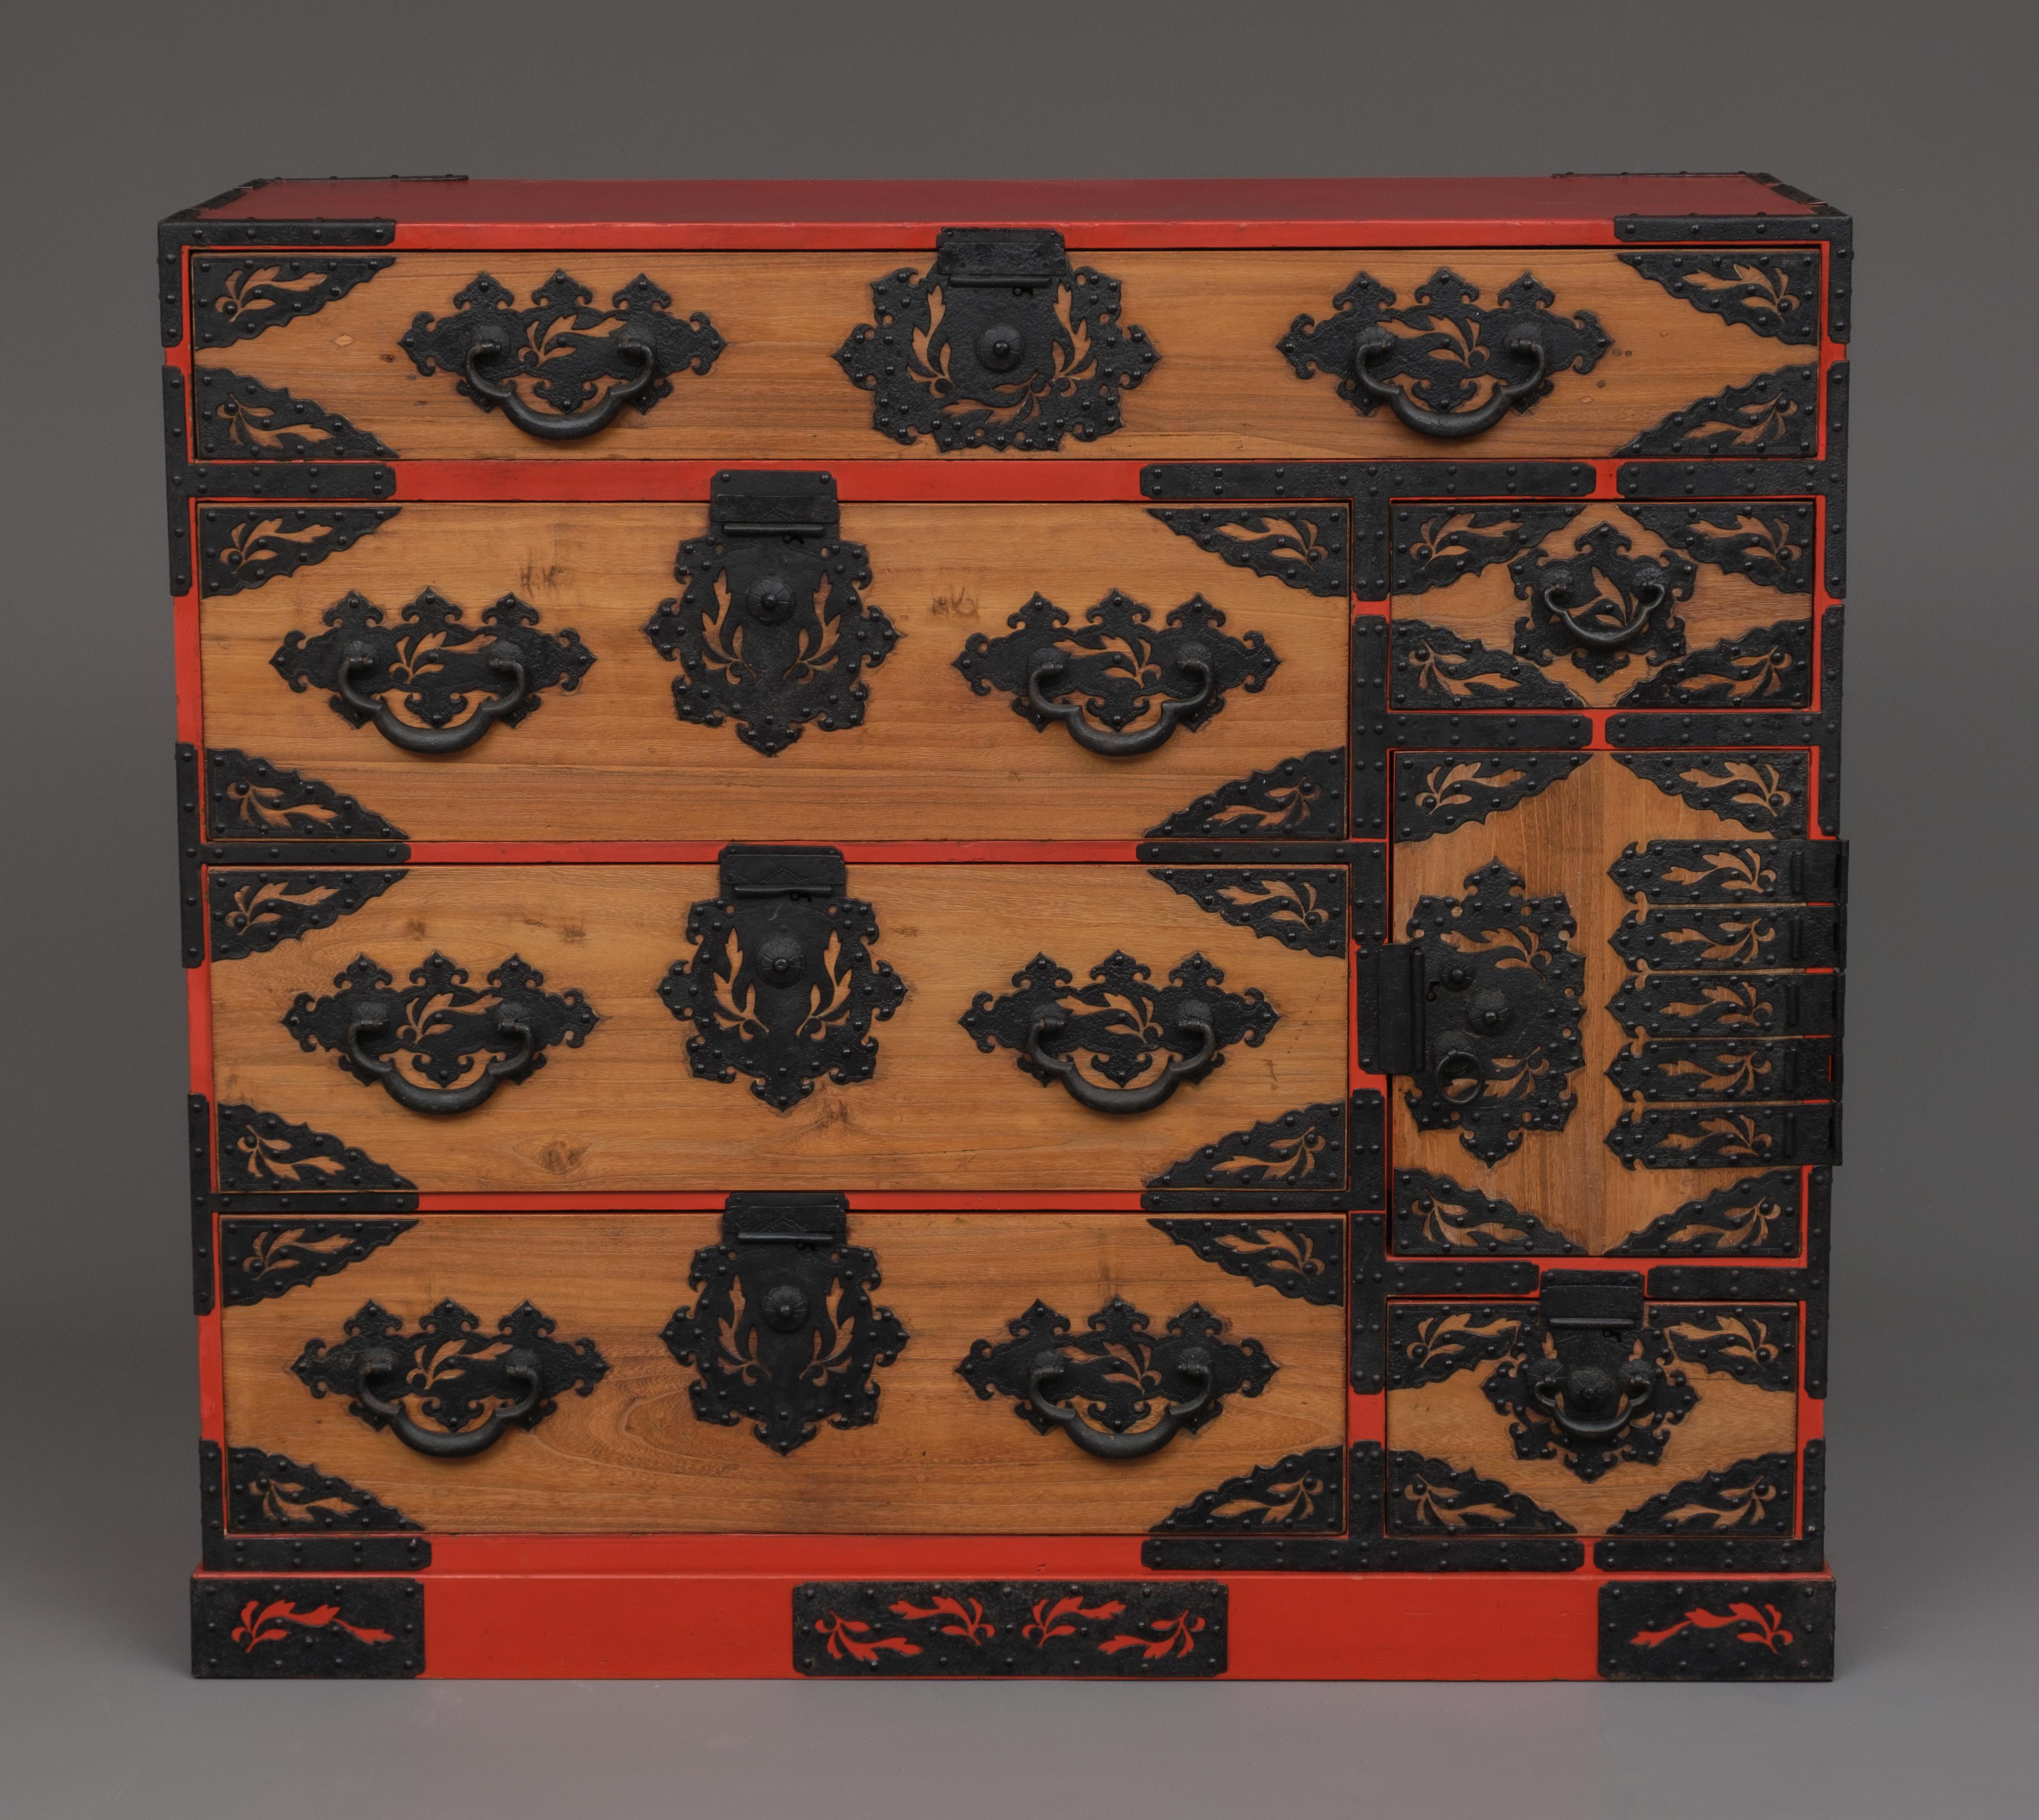 Rare and richly adorned wooden Kyûshû ishô'dansu (cabinet of drawers) in a single section, on a plinth. 
Fully restored, cleaned and waxed.

The drawer faces are made of indigenous kiri (paulownia) wood varnished in a sought after warm brown hue, a